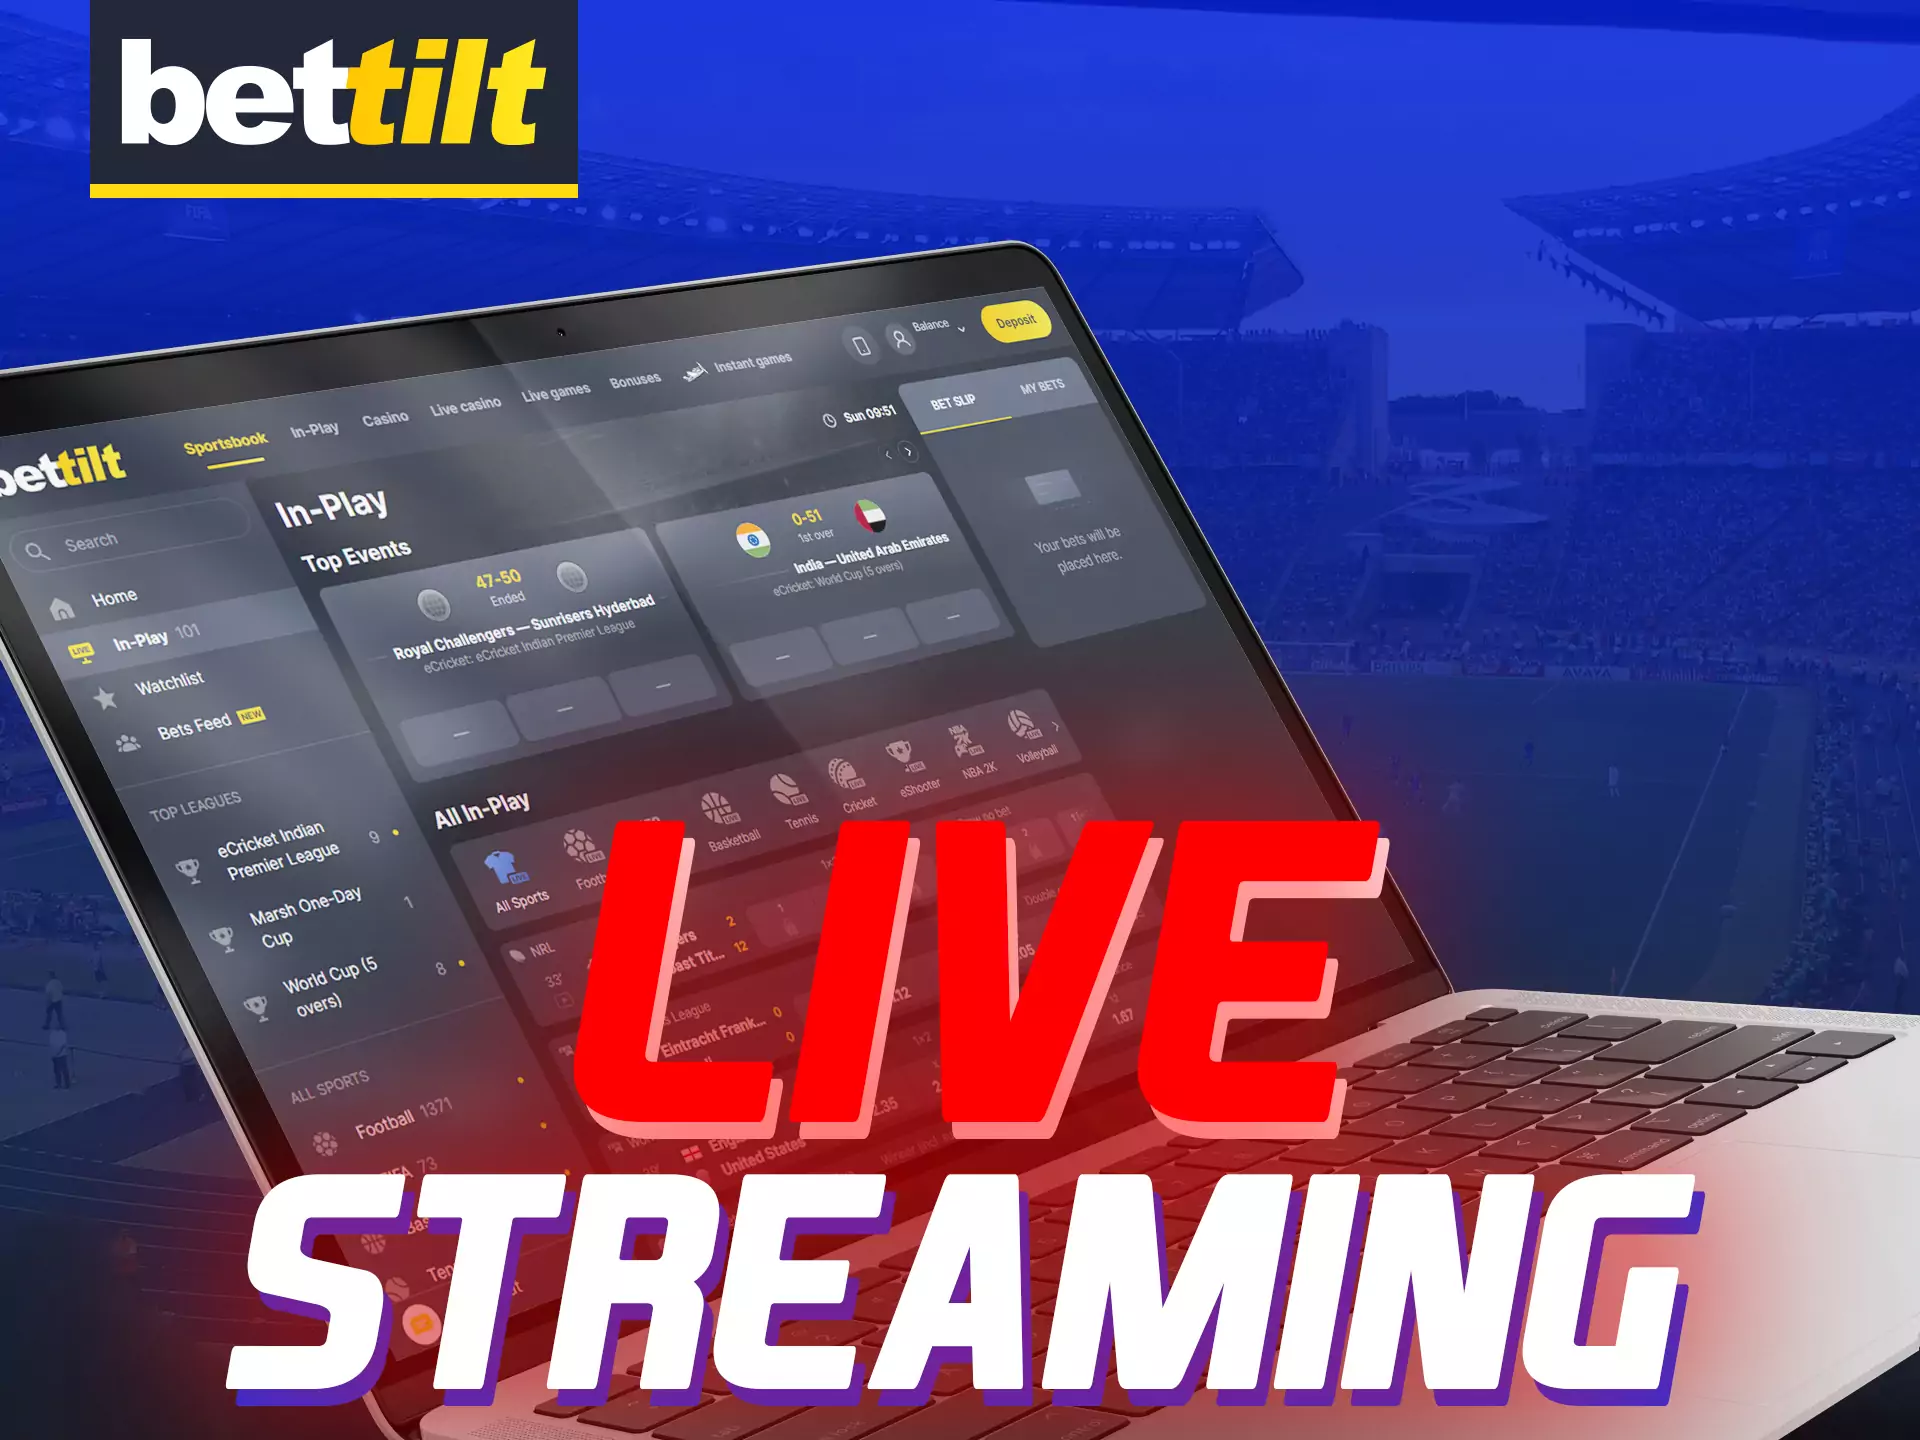 At Bettilt, place your bets while the match is streaming live.